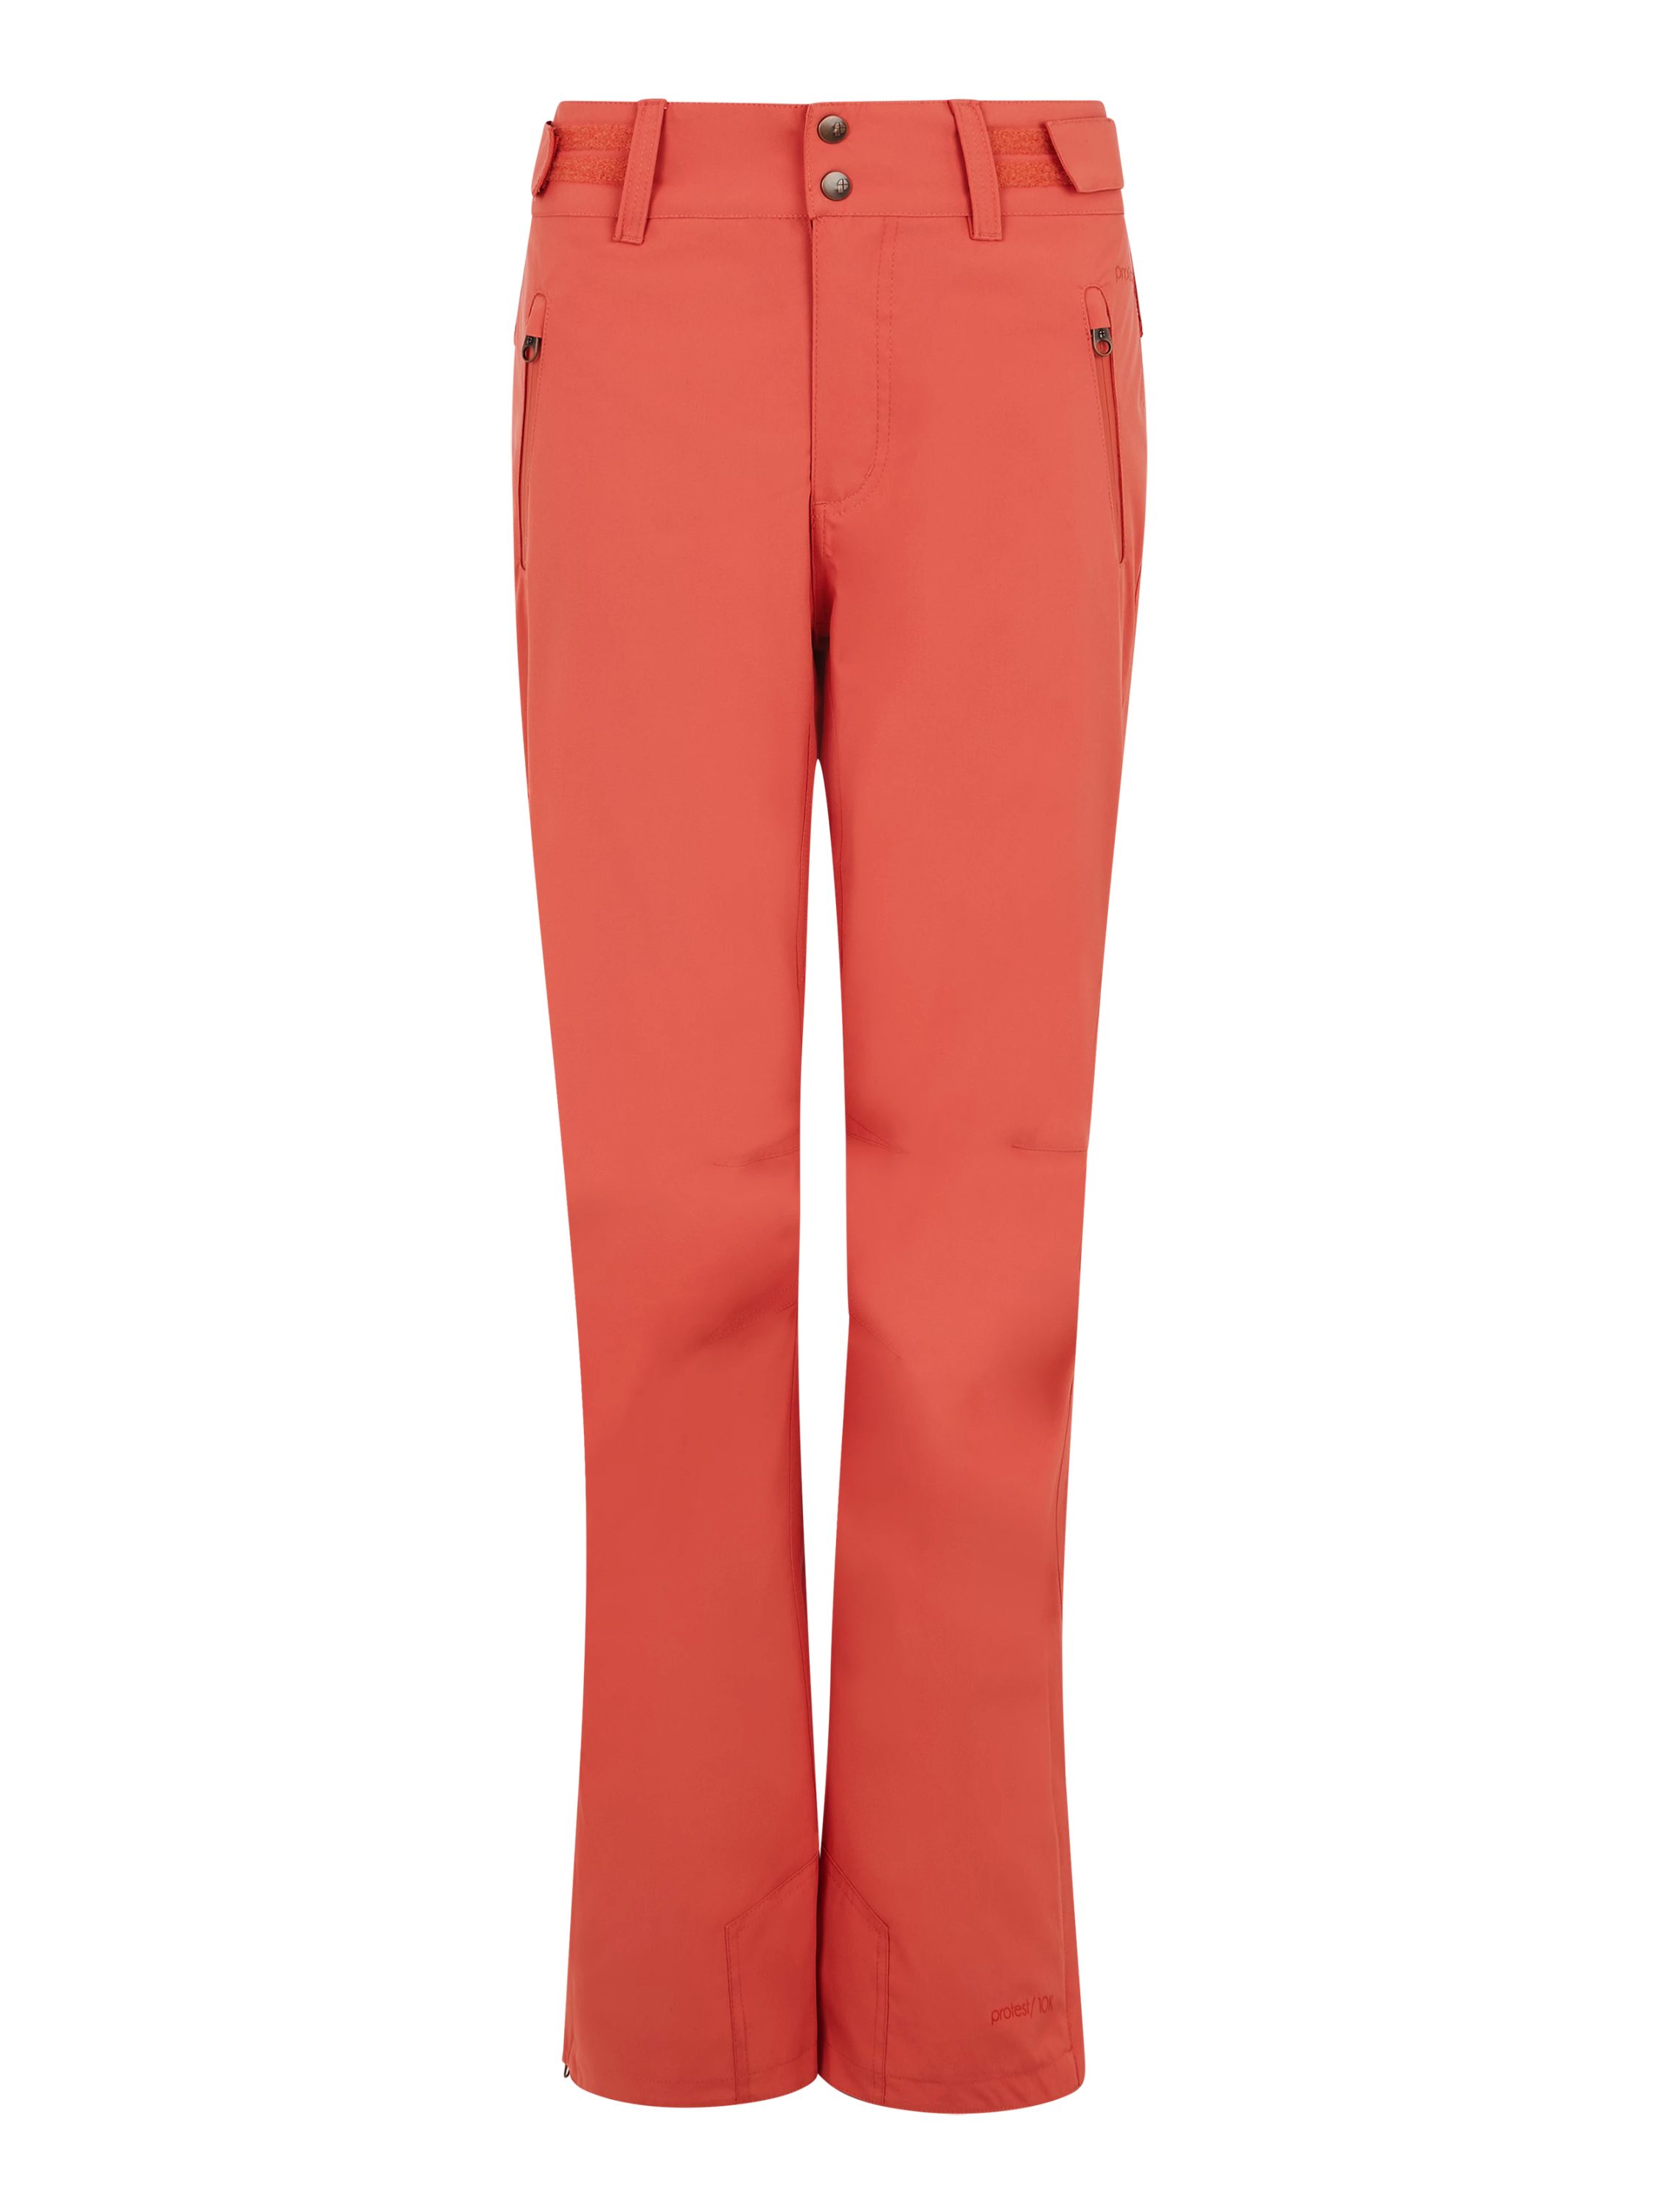 Red snowpants Tosca CINNAMON Protest Skihose